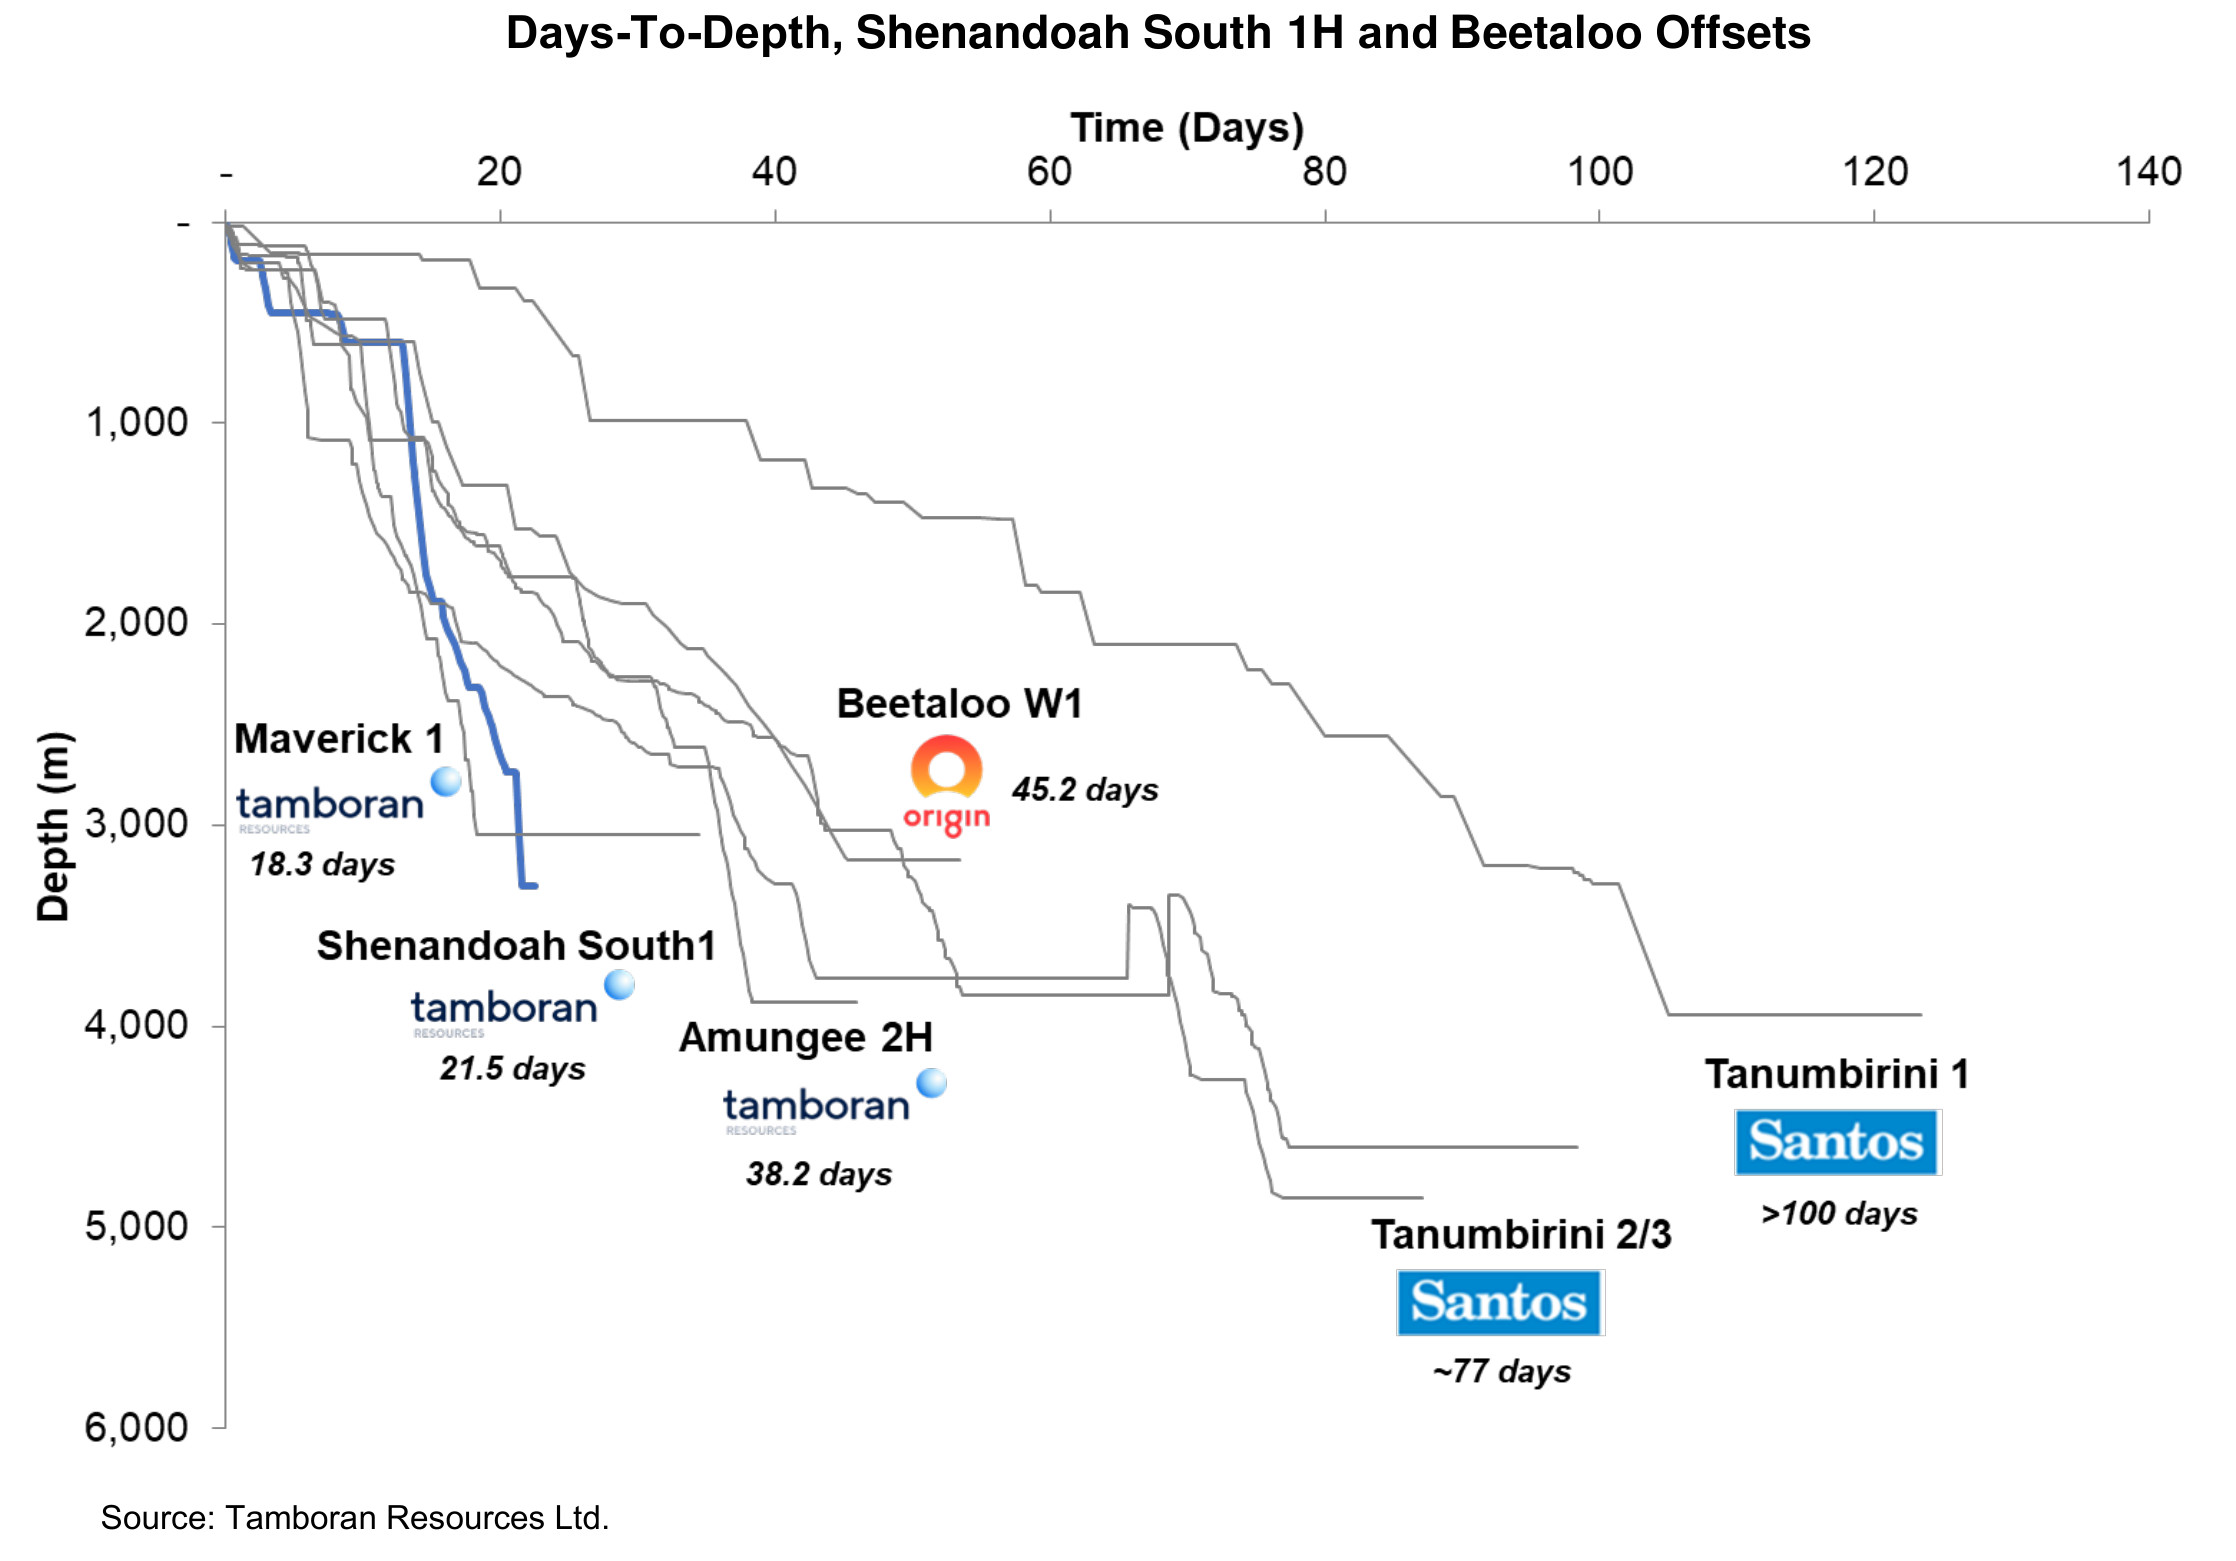 Time-Depth chart of Shenandoah South 1H compared to Beetaloo offset wells